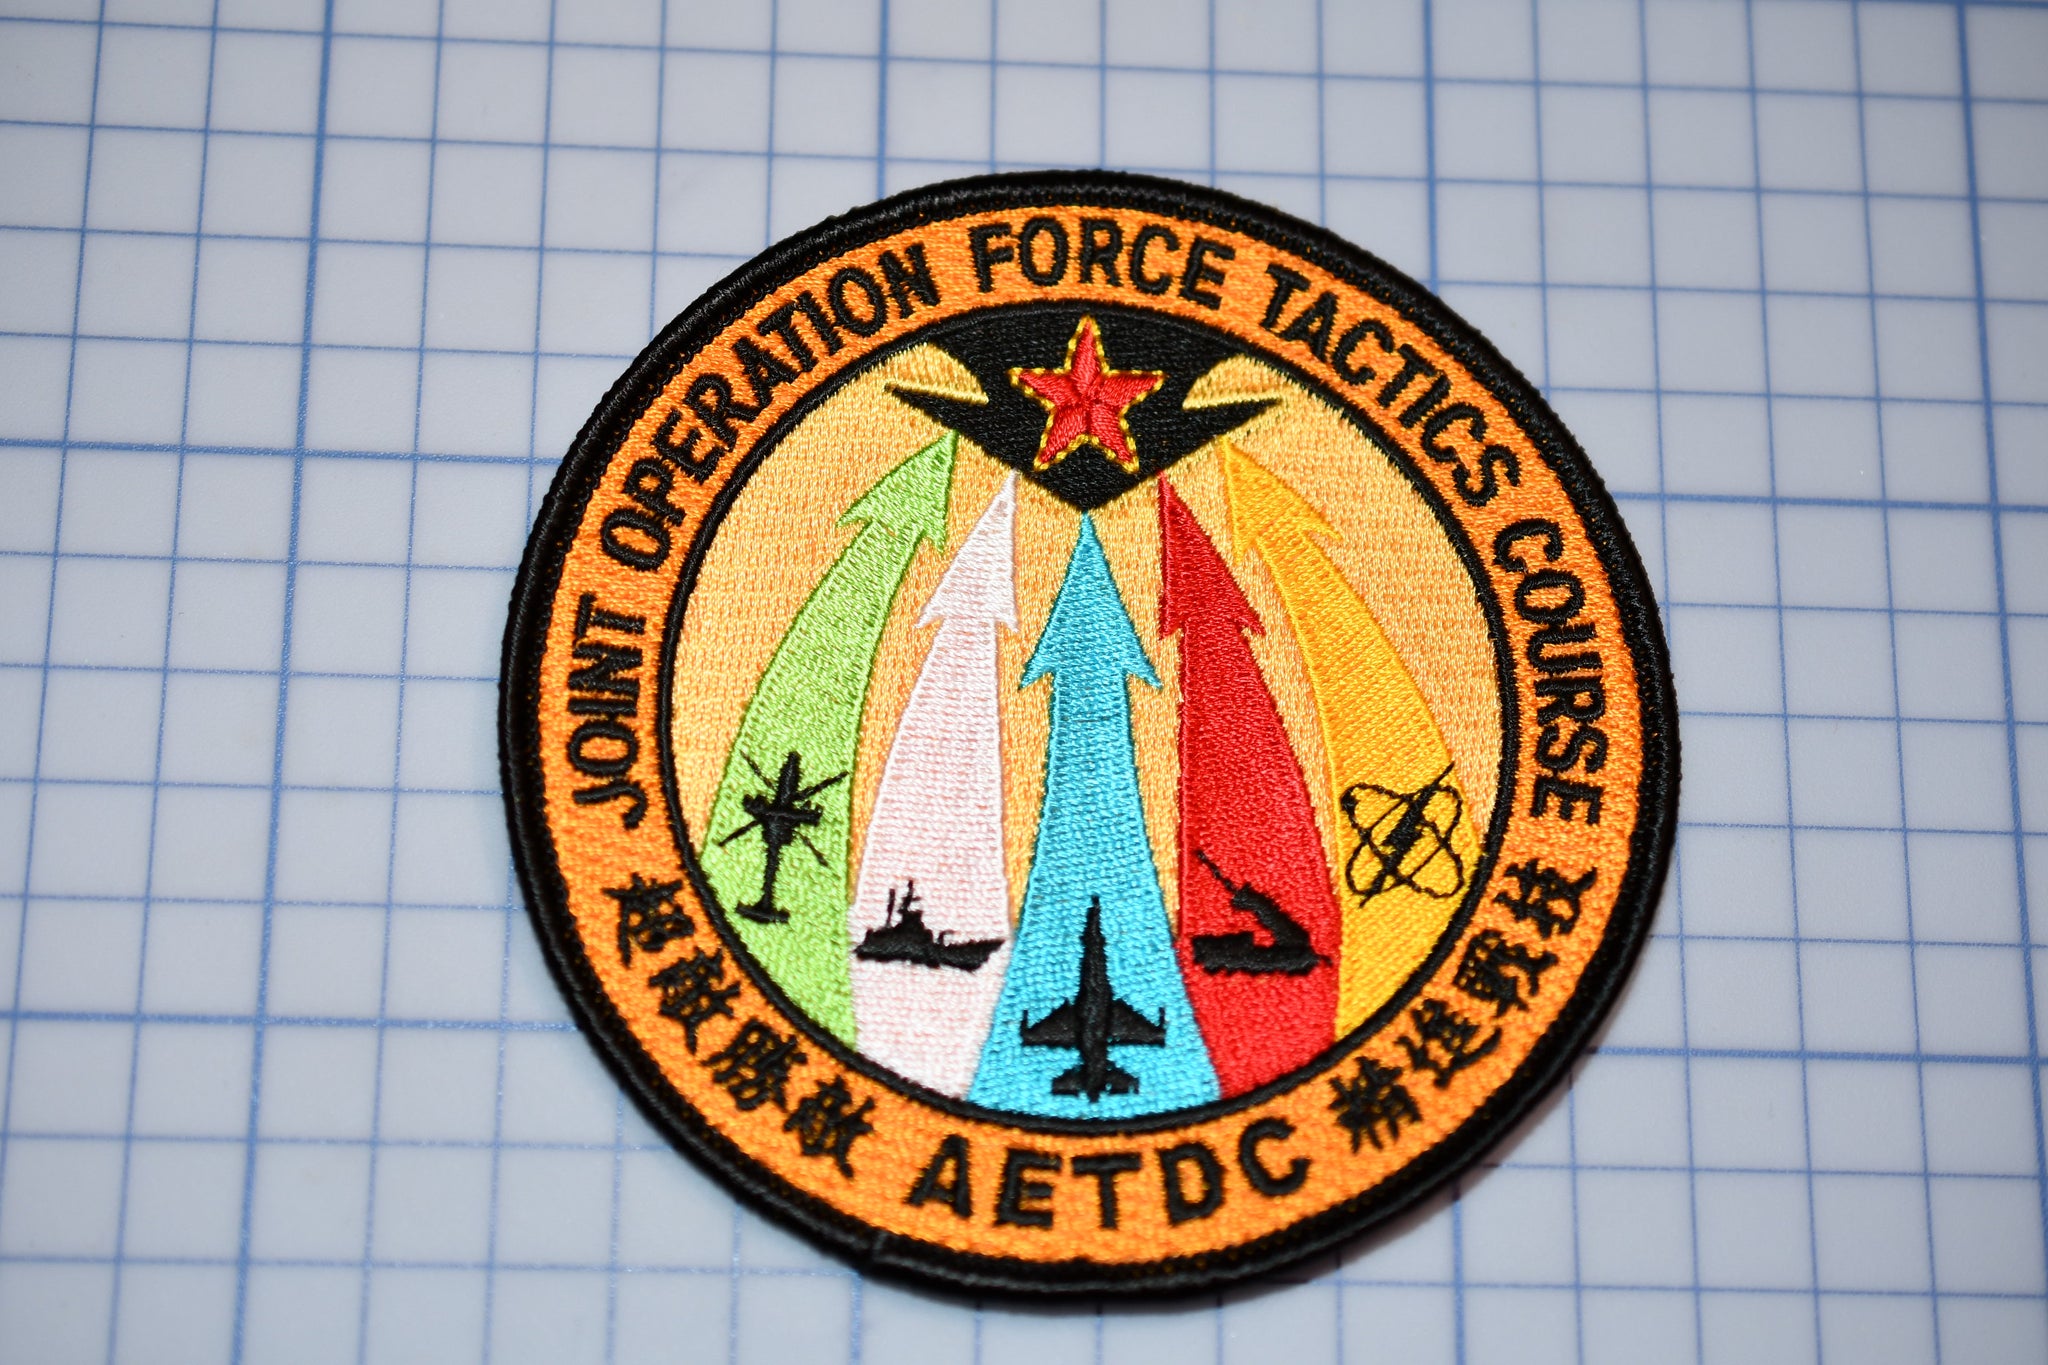 Air Education Training Doctrine Command Patch (B29-345)